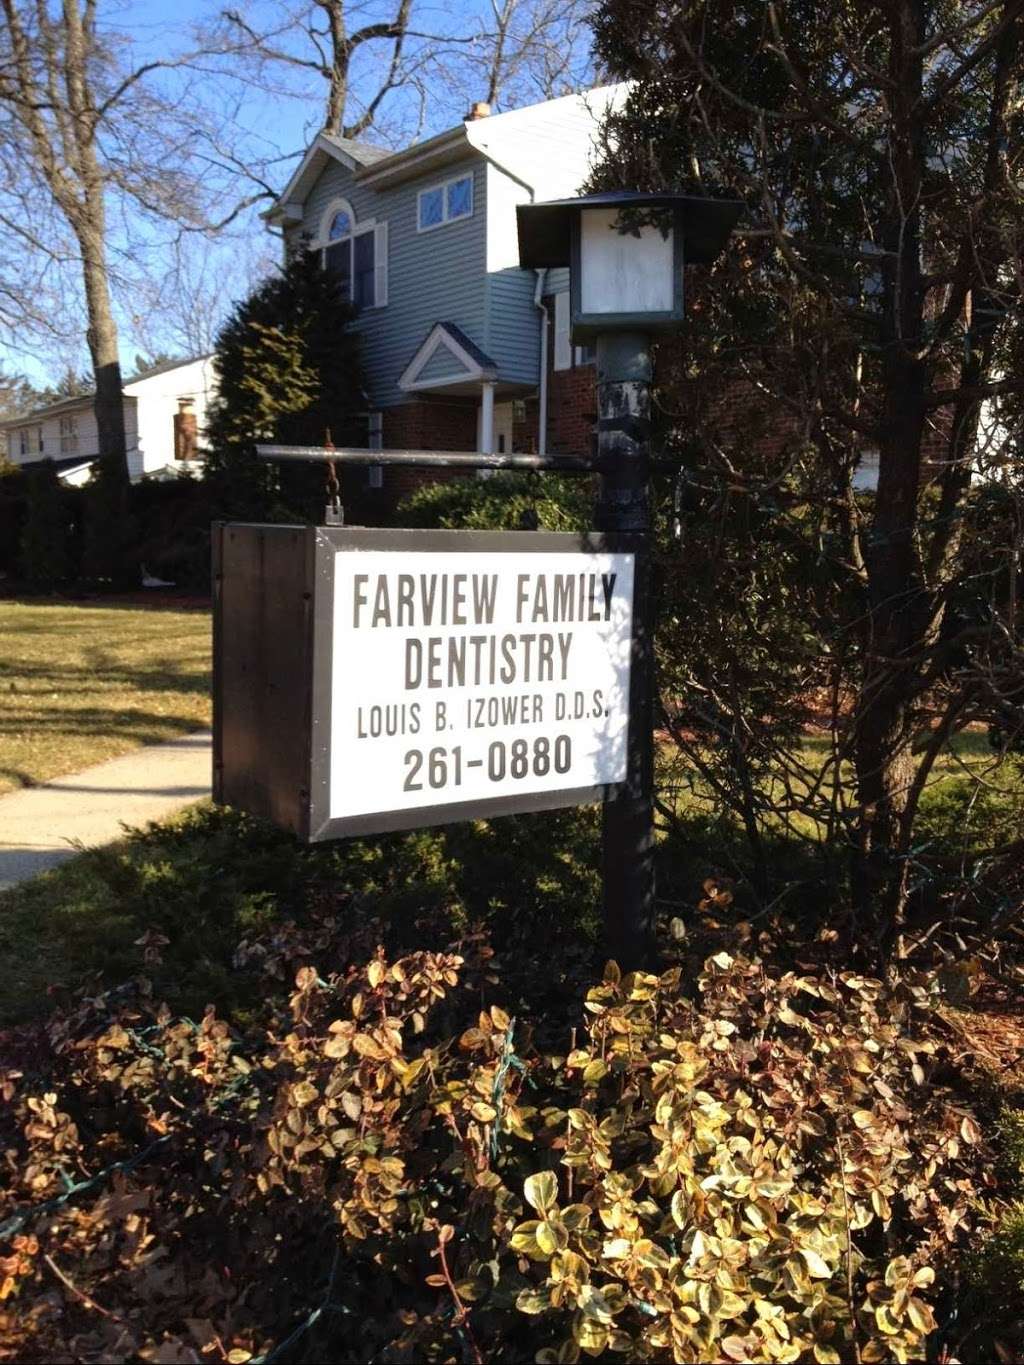 Farview Family Dentistry: Izower Louis B DDS | 342 N Farview Ave, Paramus, NJ 07652, USA | Phone: (201) 261-0880